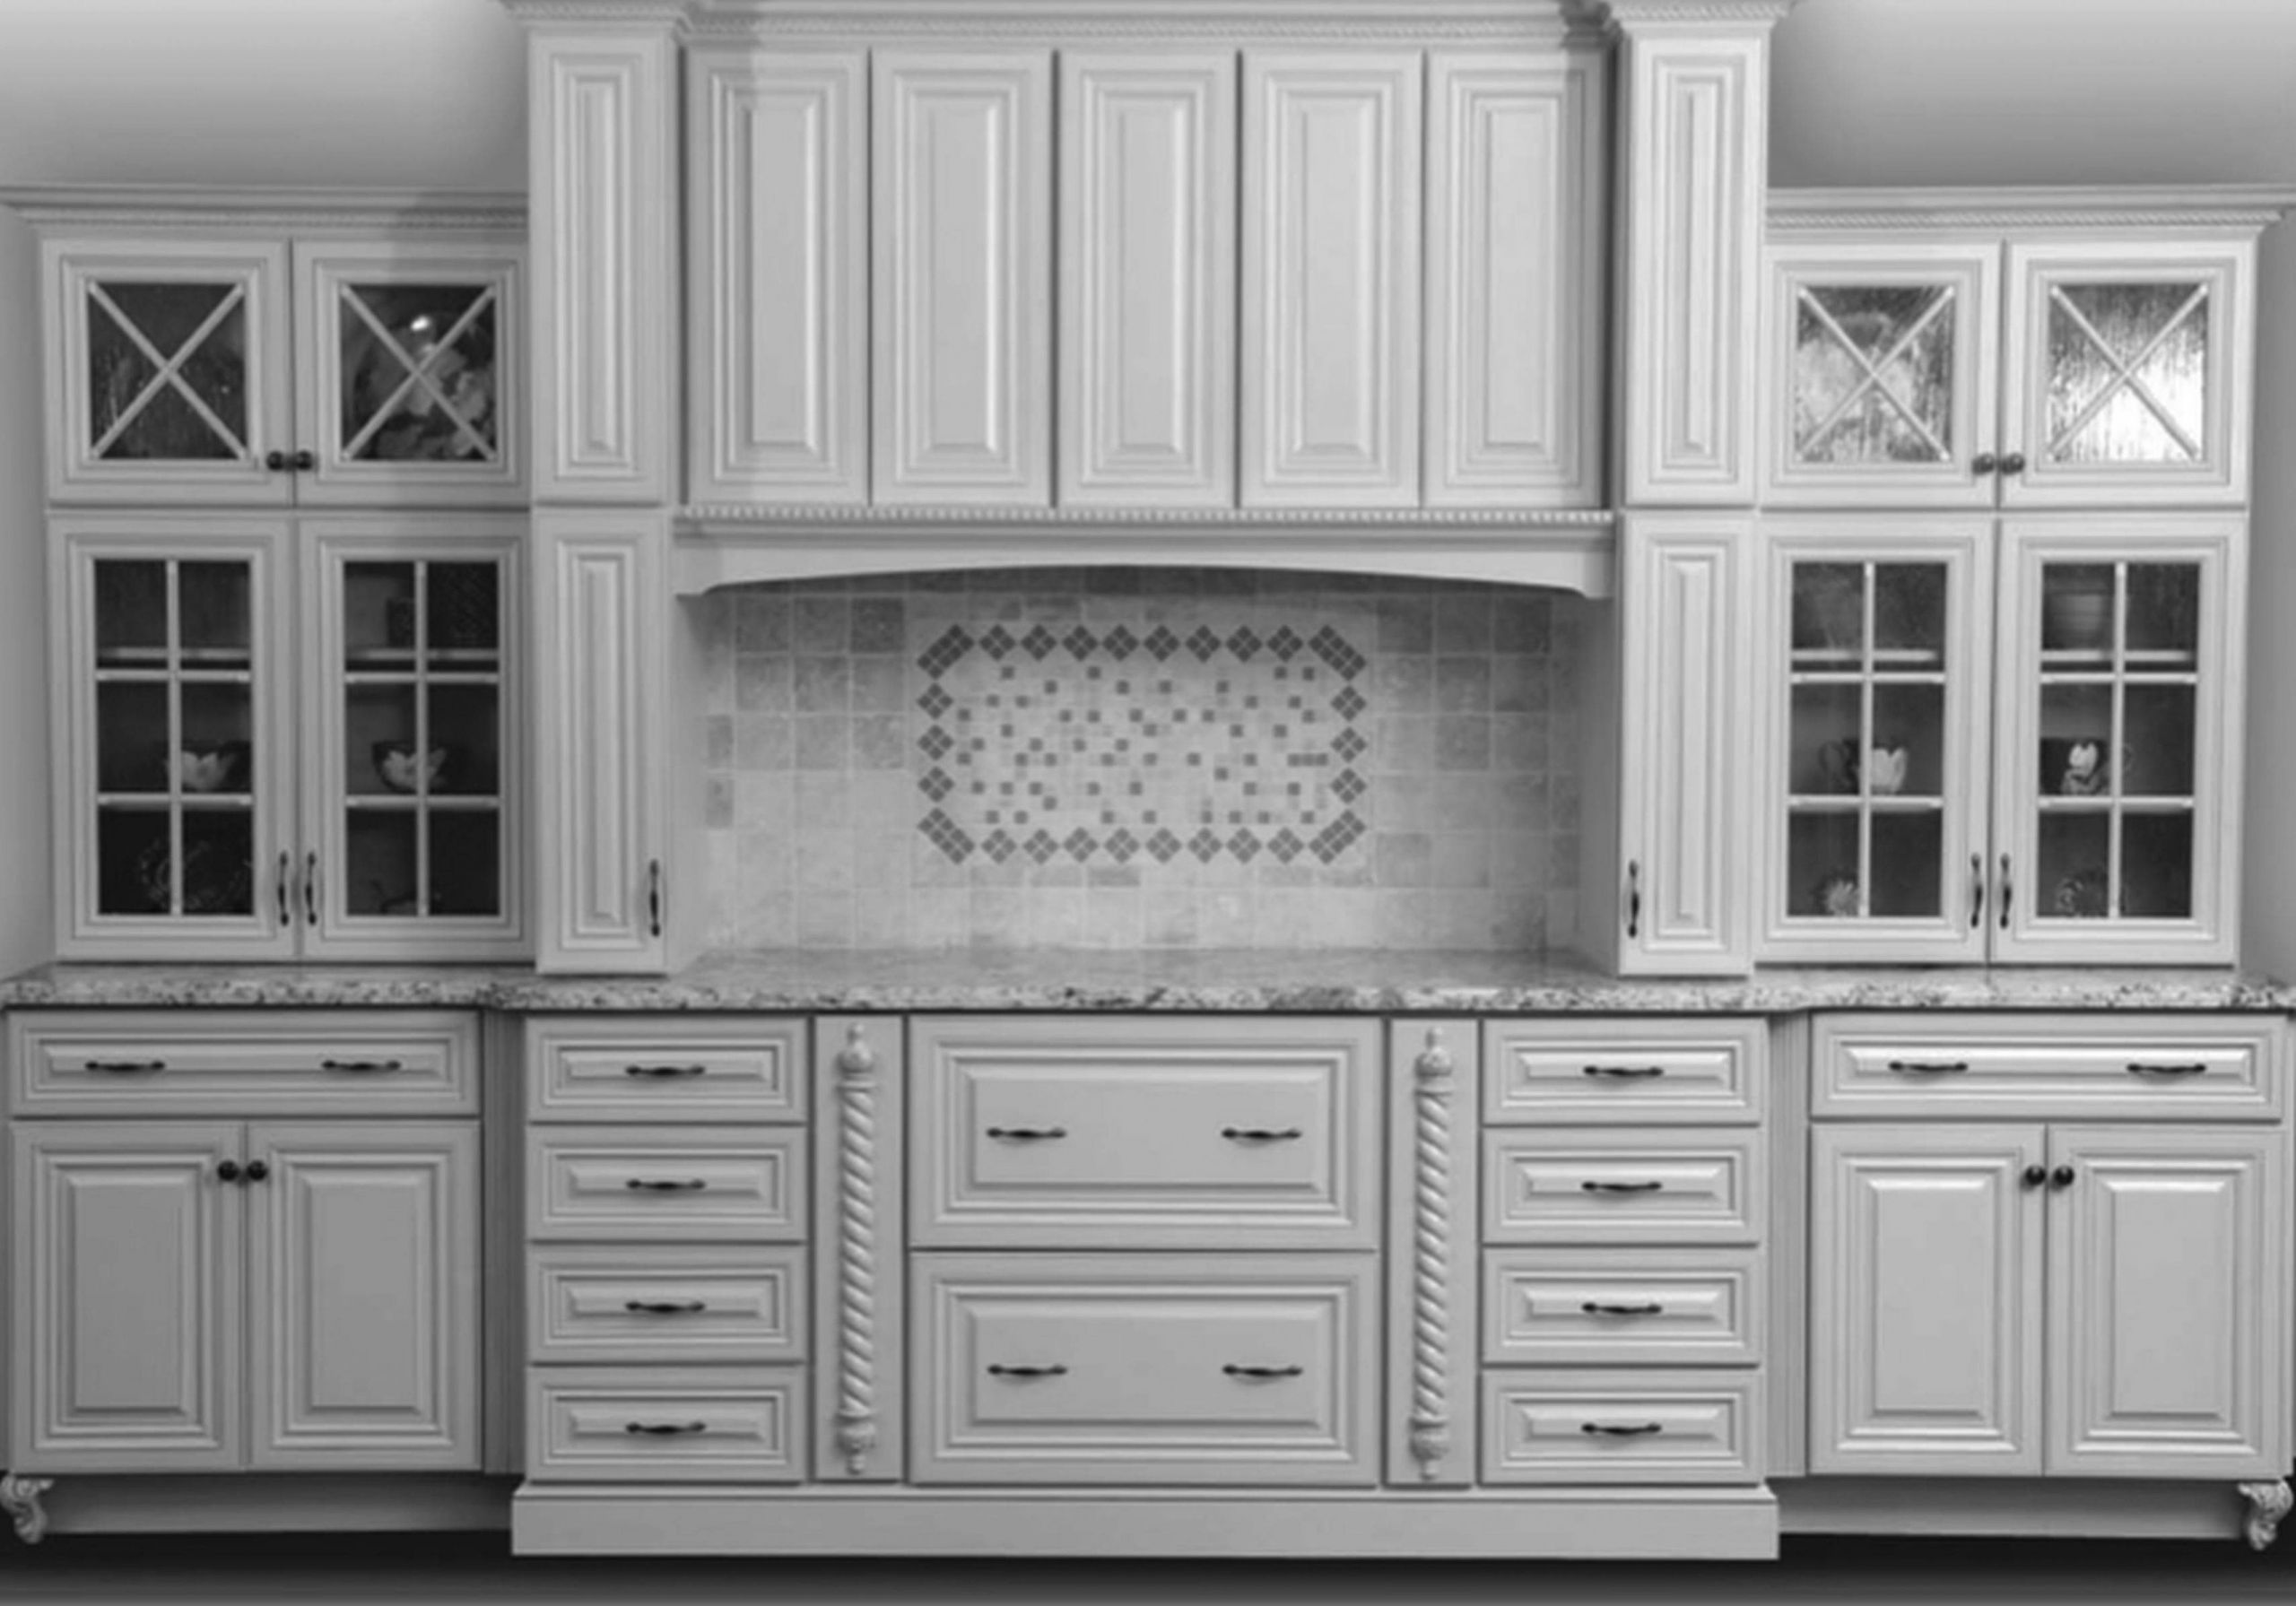 Lowes Kitchen Remodel Reviews
 Kitchen Lowes Kitchen Planner For Your Home Design Ideas